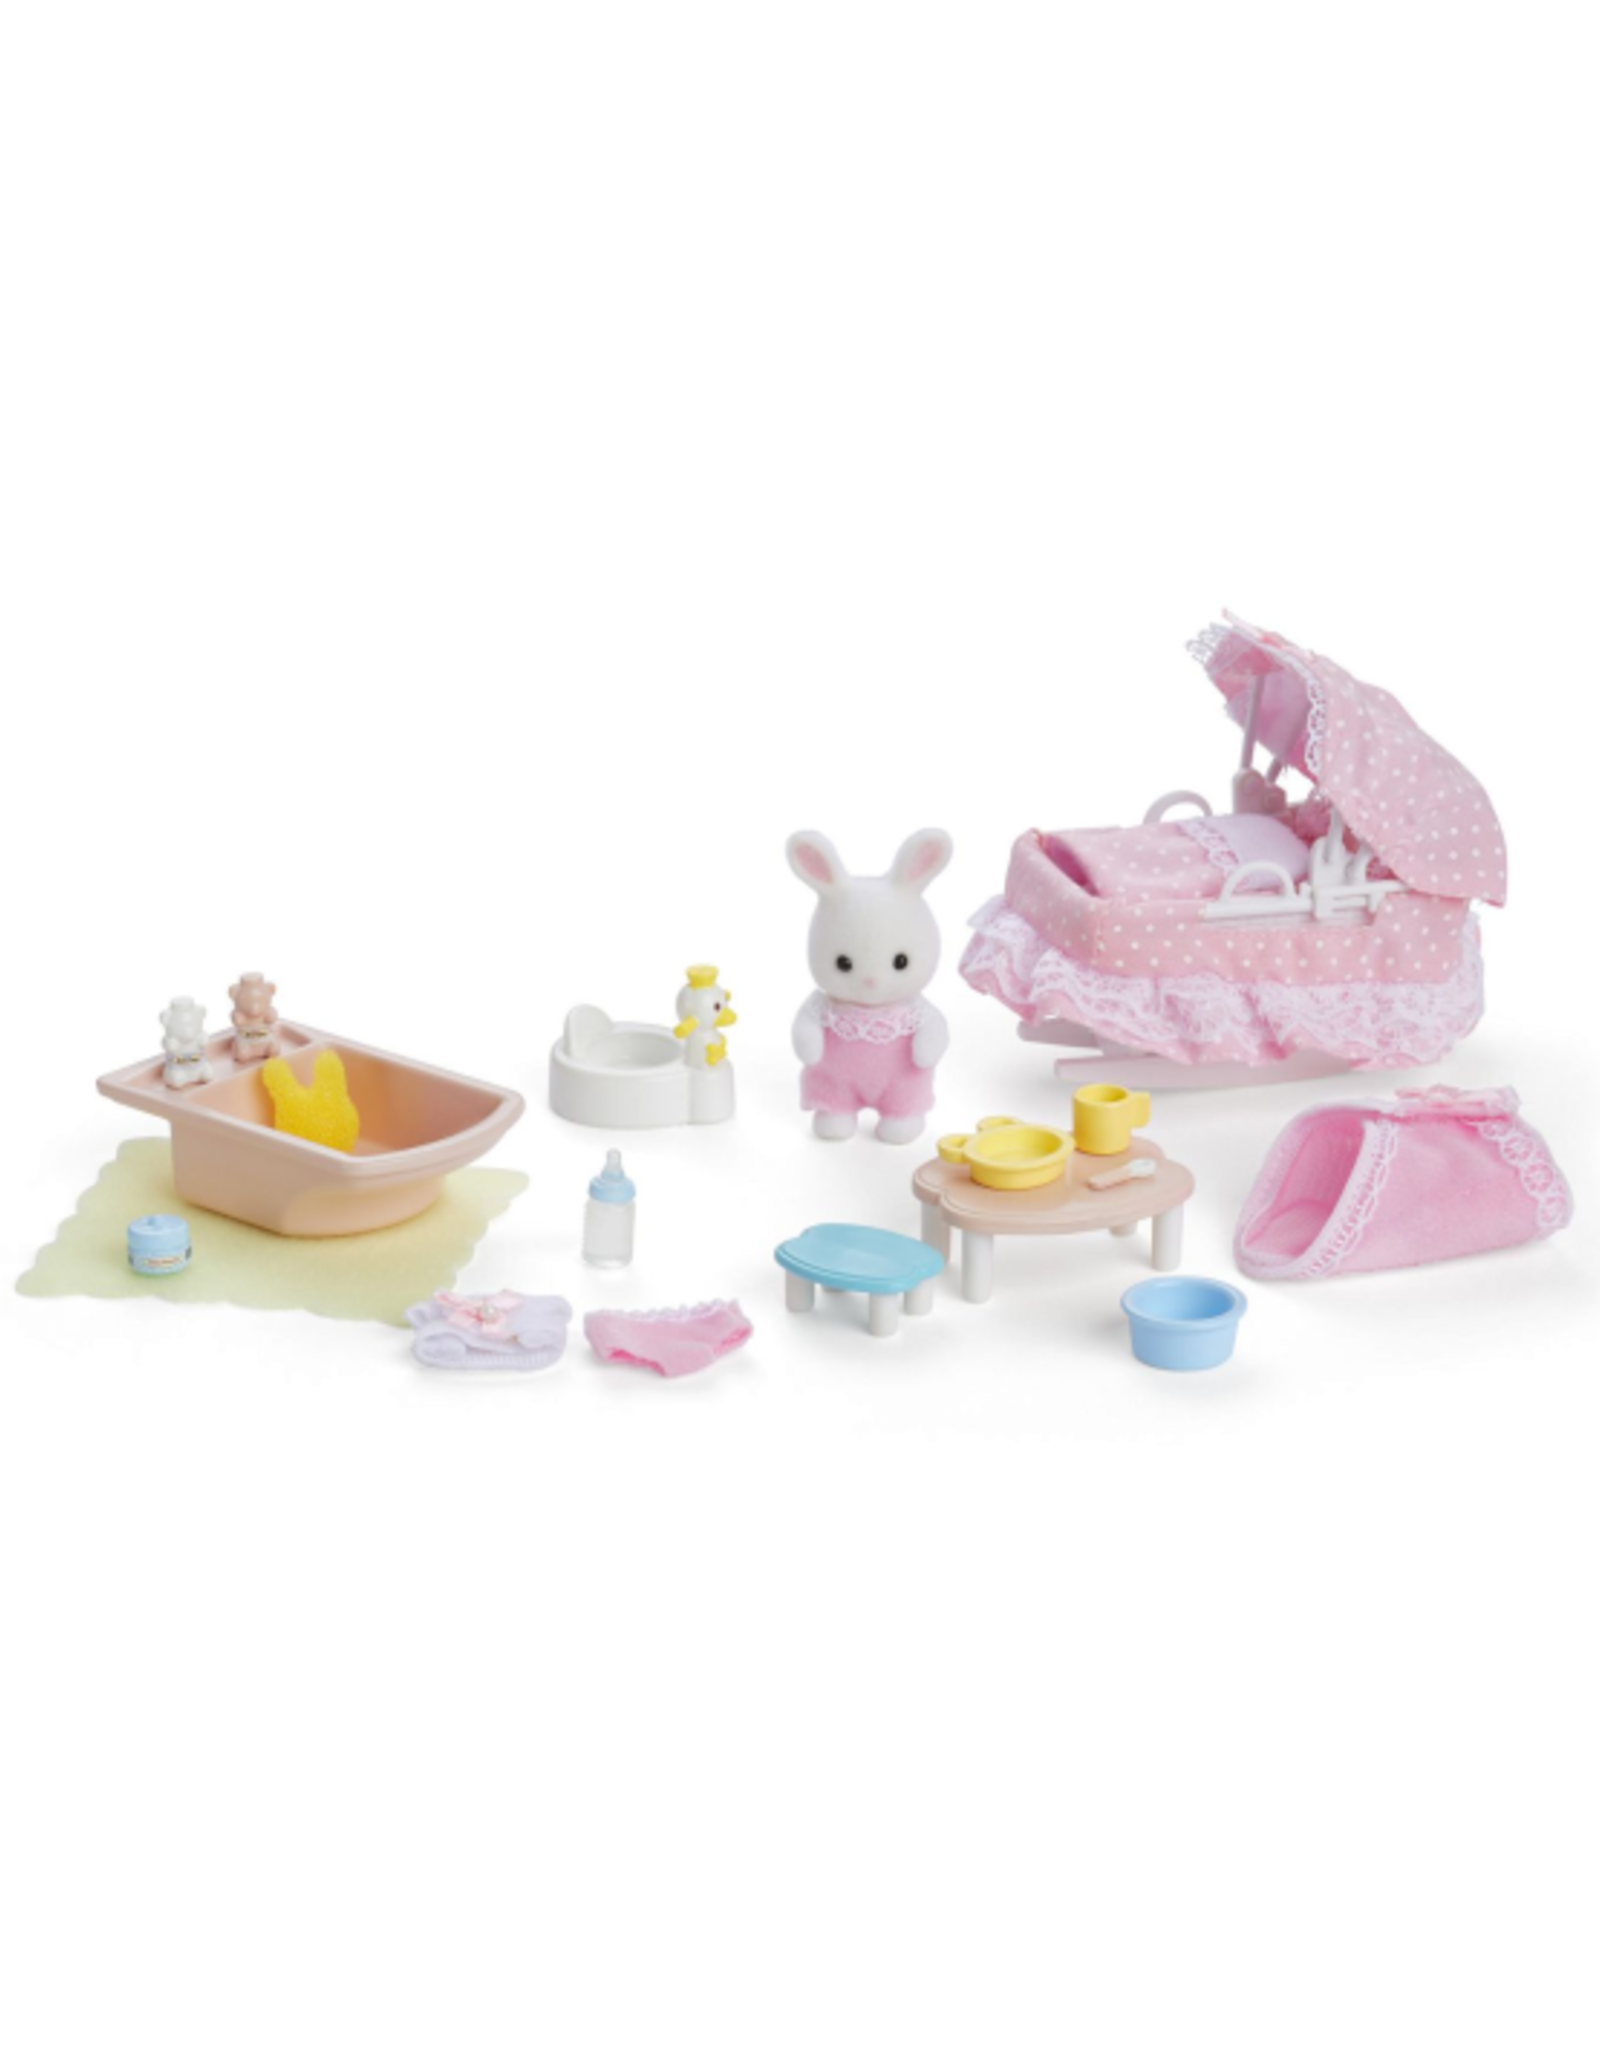 Calico Critters Calico Critters - Sophie's Love n Care